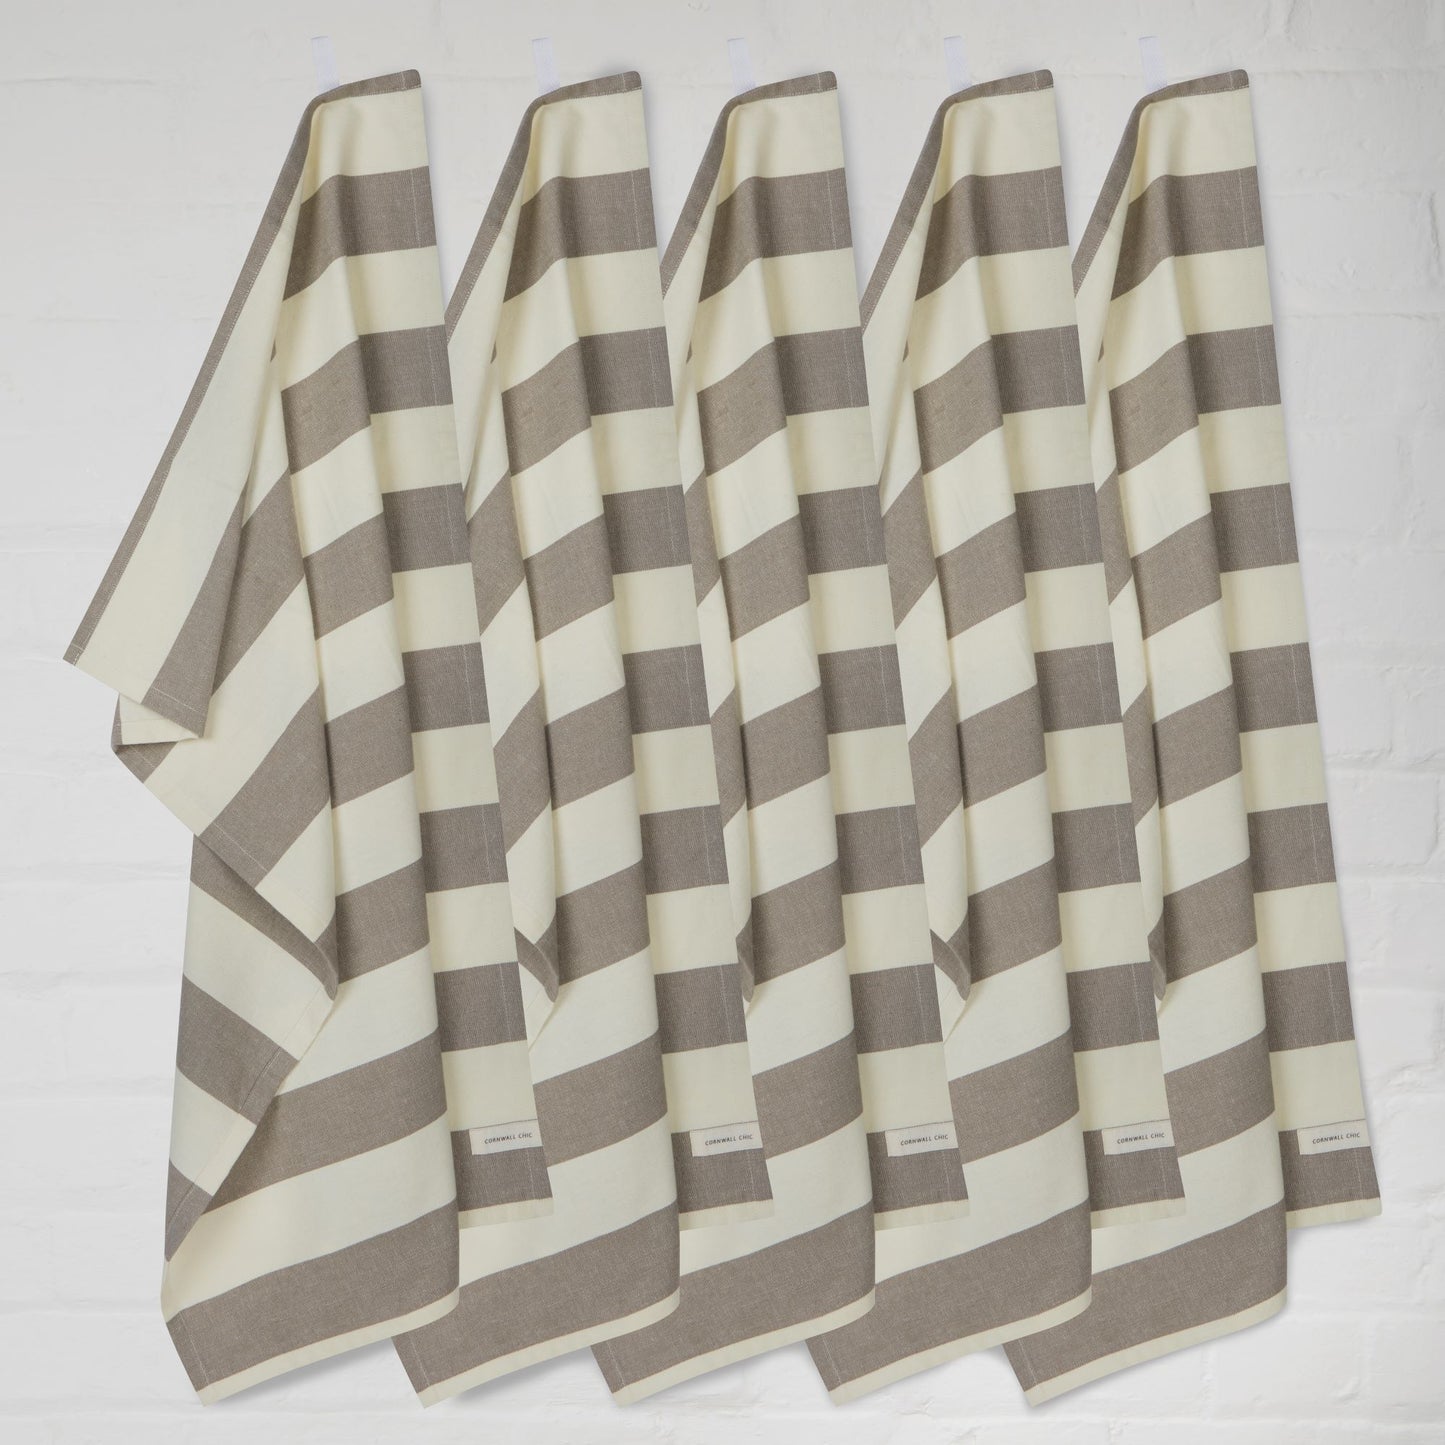 Set of 5 Woven Striped Cotton Tea Towels in Three Colours - Cornwall Chic